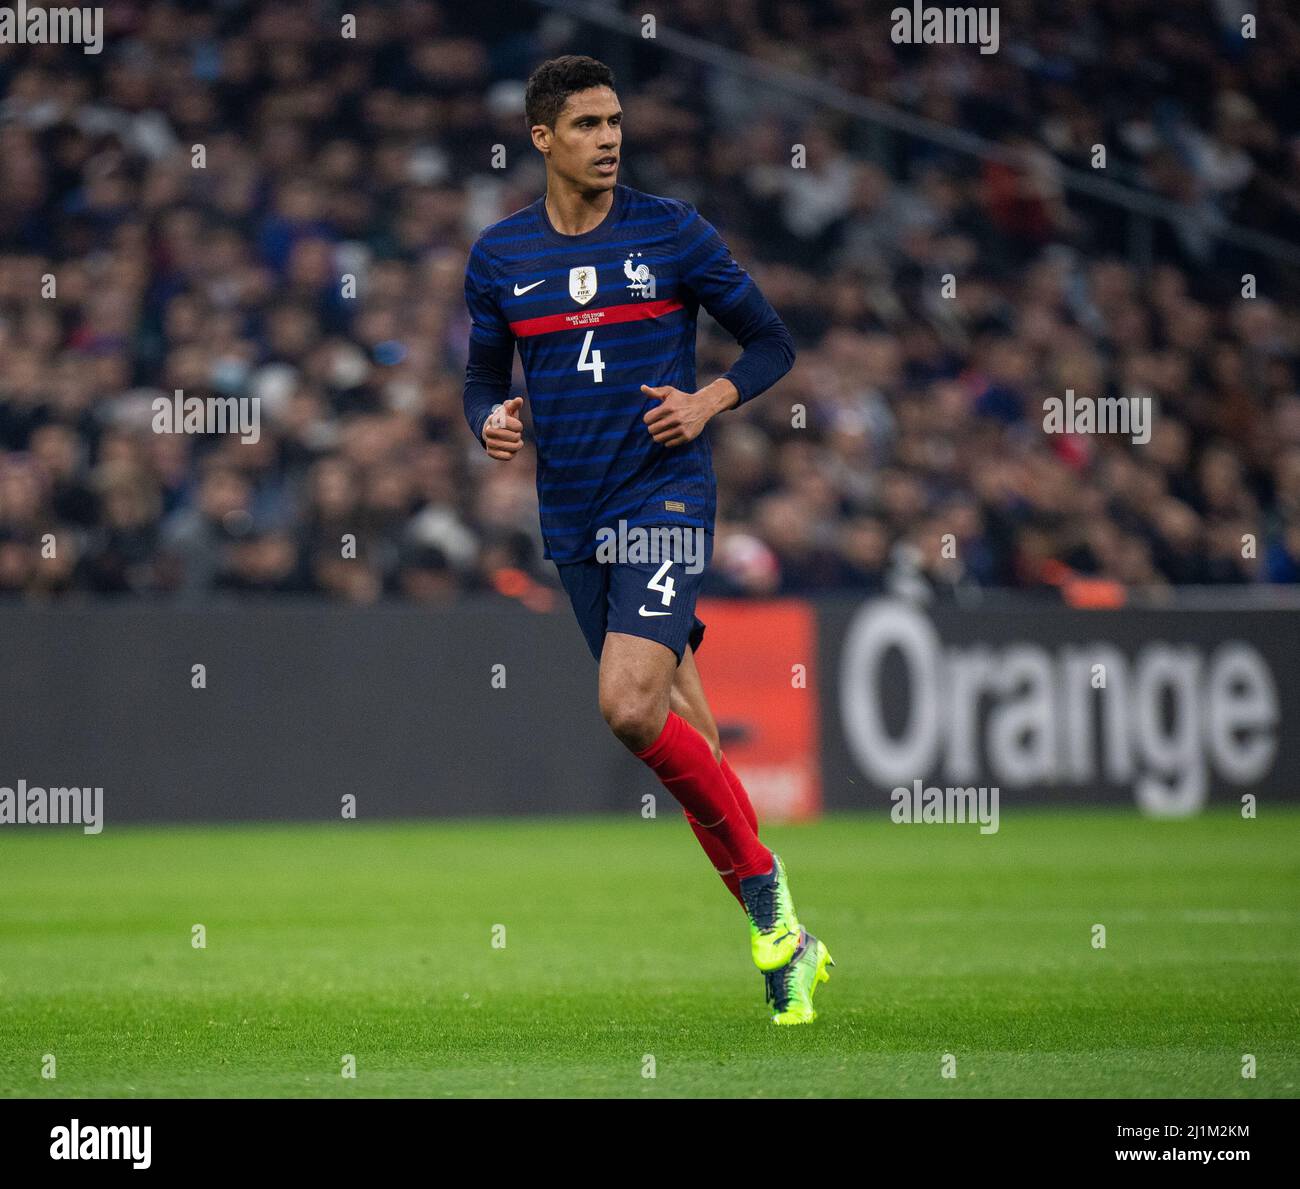 MARSEILLE, FRANCE - MARCH 25: Raphael Varane of France during the international friendly match between France and Ivory Coast at Orange Velodrome on M Stock Photo